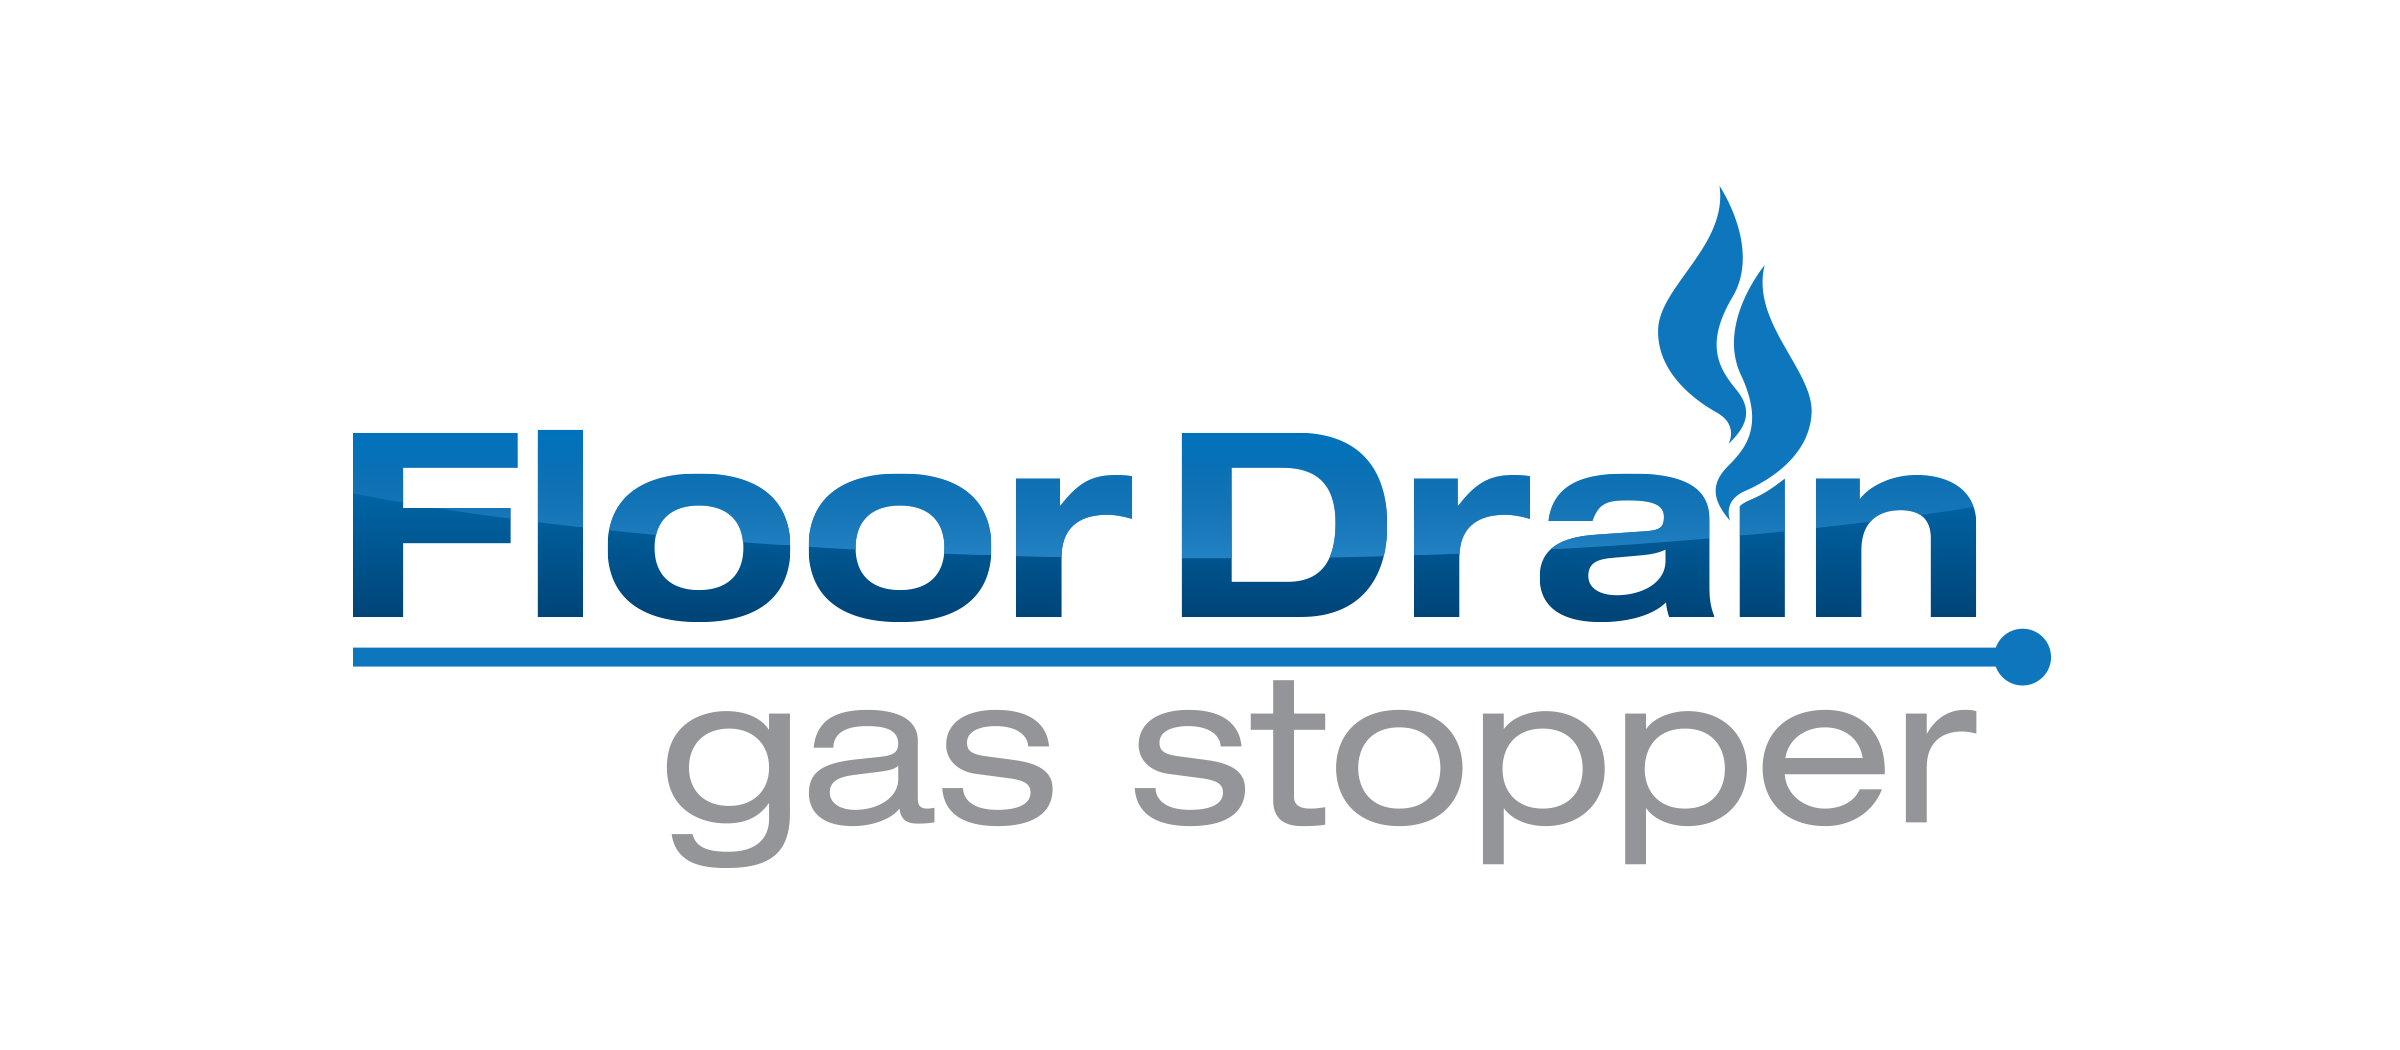 The Floor Drain Gas Stopper is a new product designed to stop sewer gases from coming in through the floor drain.